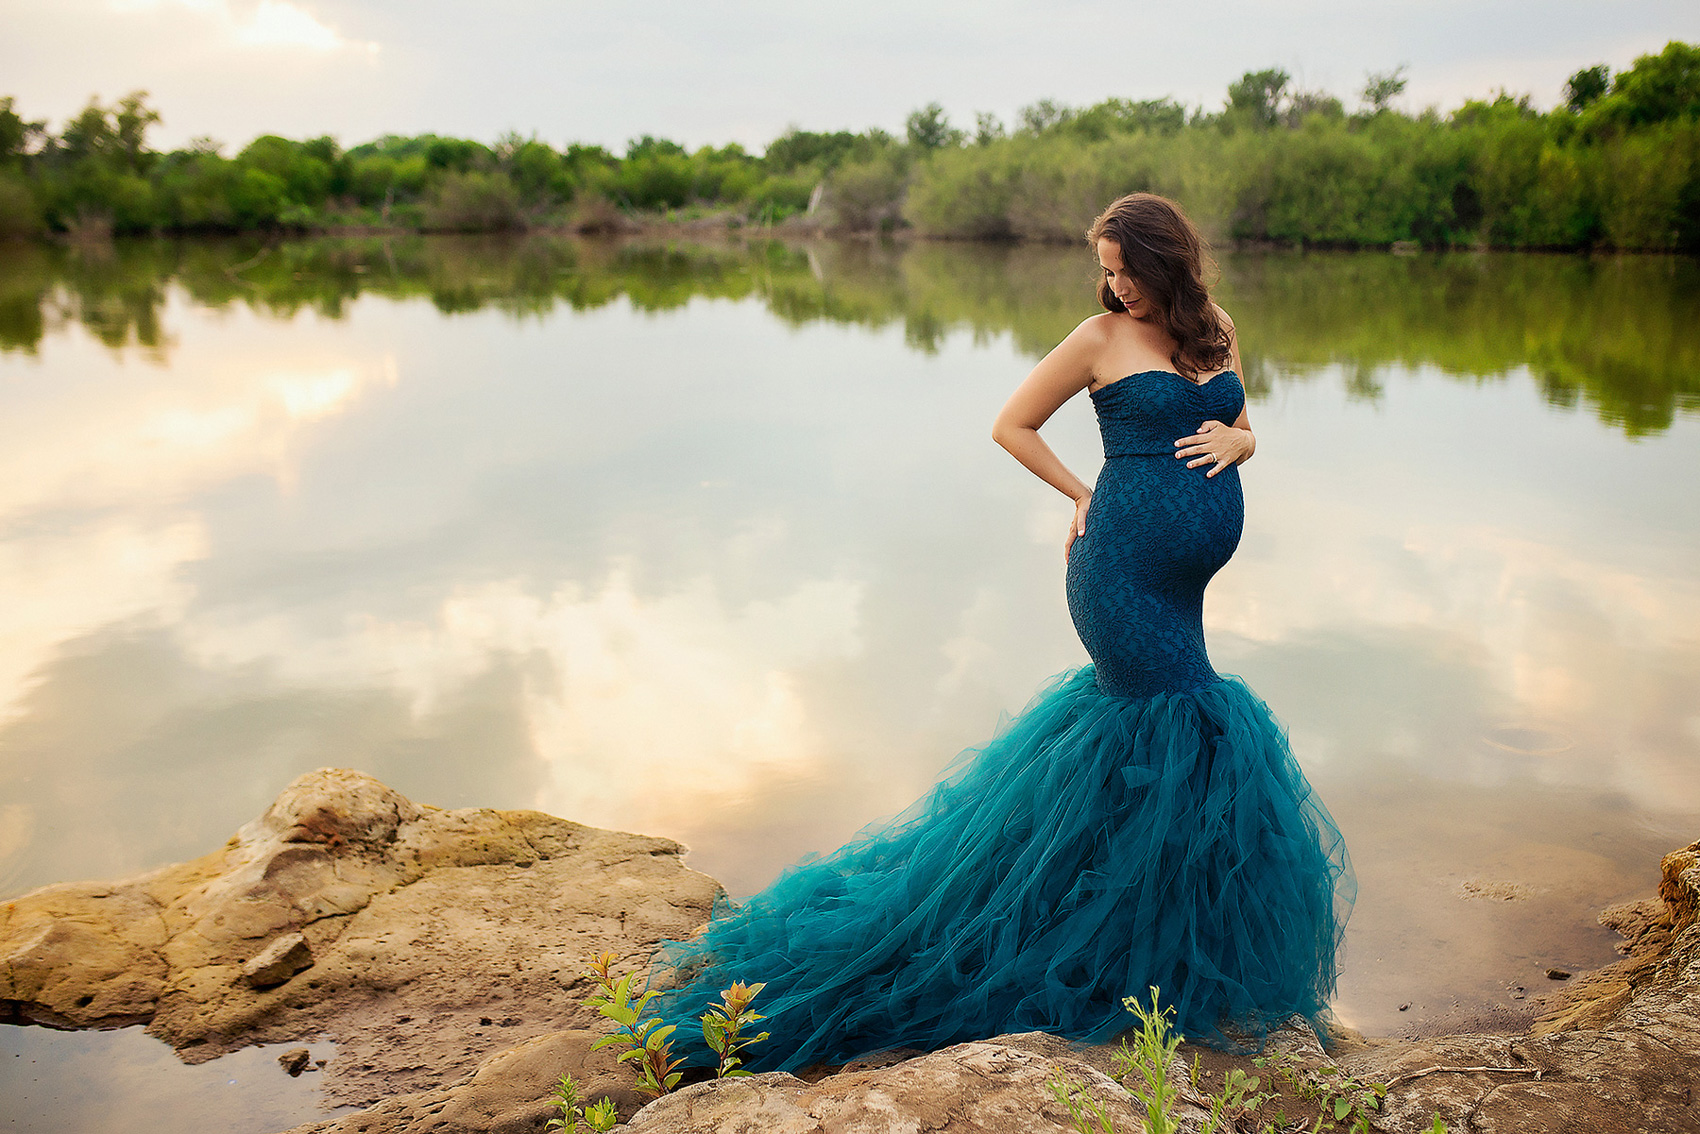 Maternity Poses” – Searching for Images that Inspire – Dallas